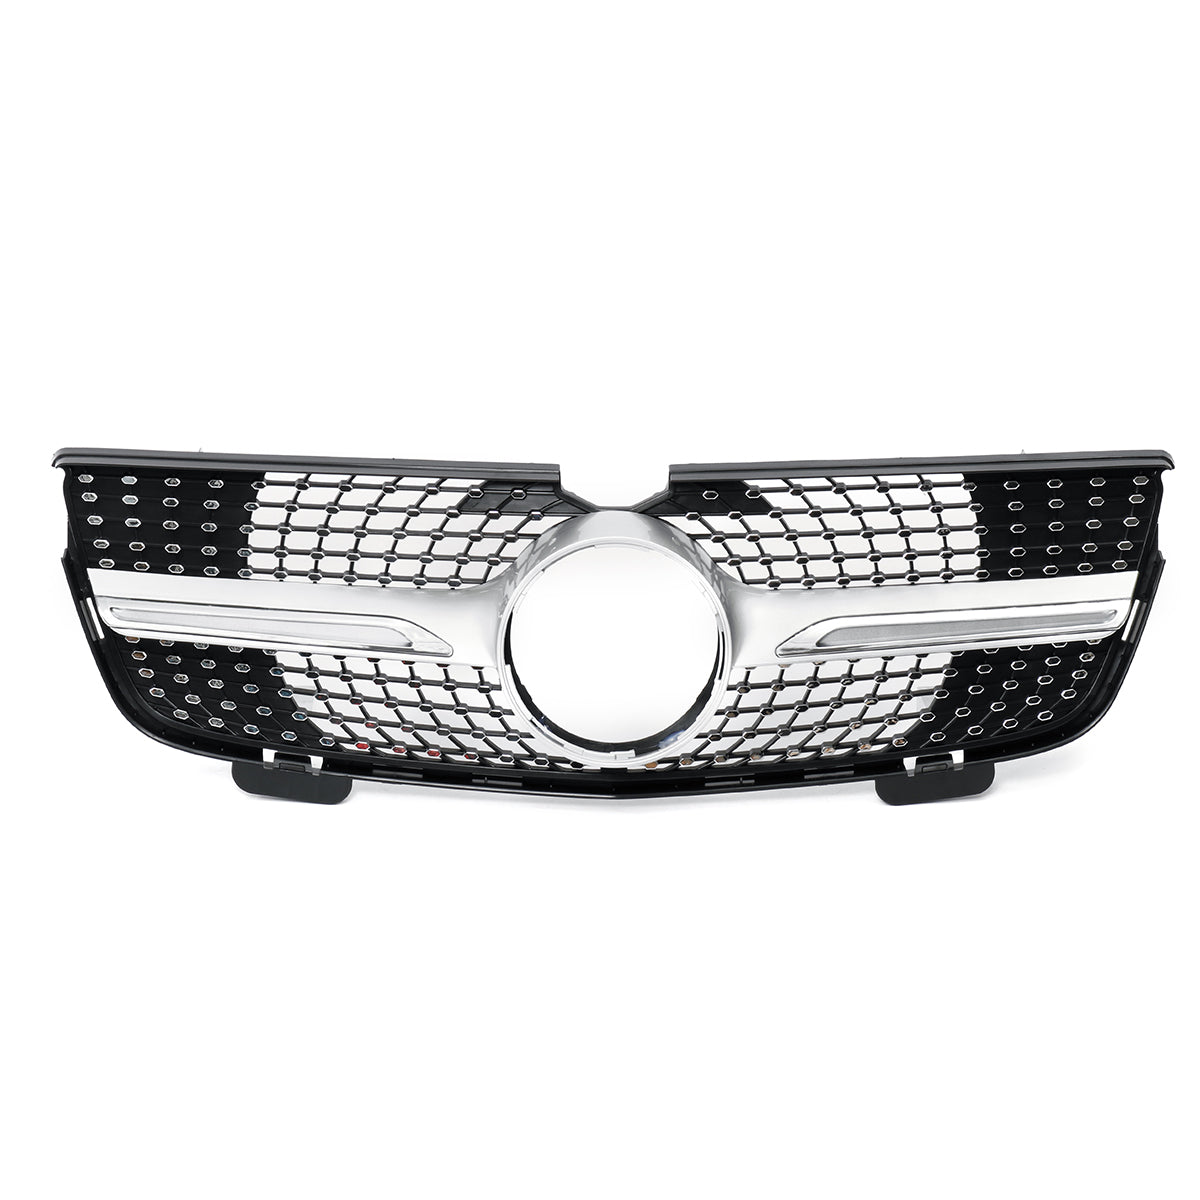 White Smoke Silver Diamond Grille Front Grill For Mercedes-Benz X164 GL-Class GL450 GL350 GL320